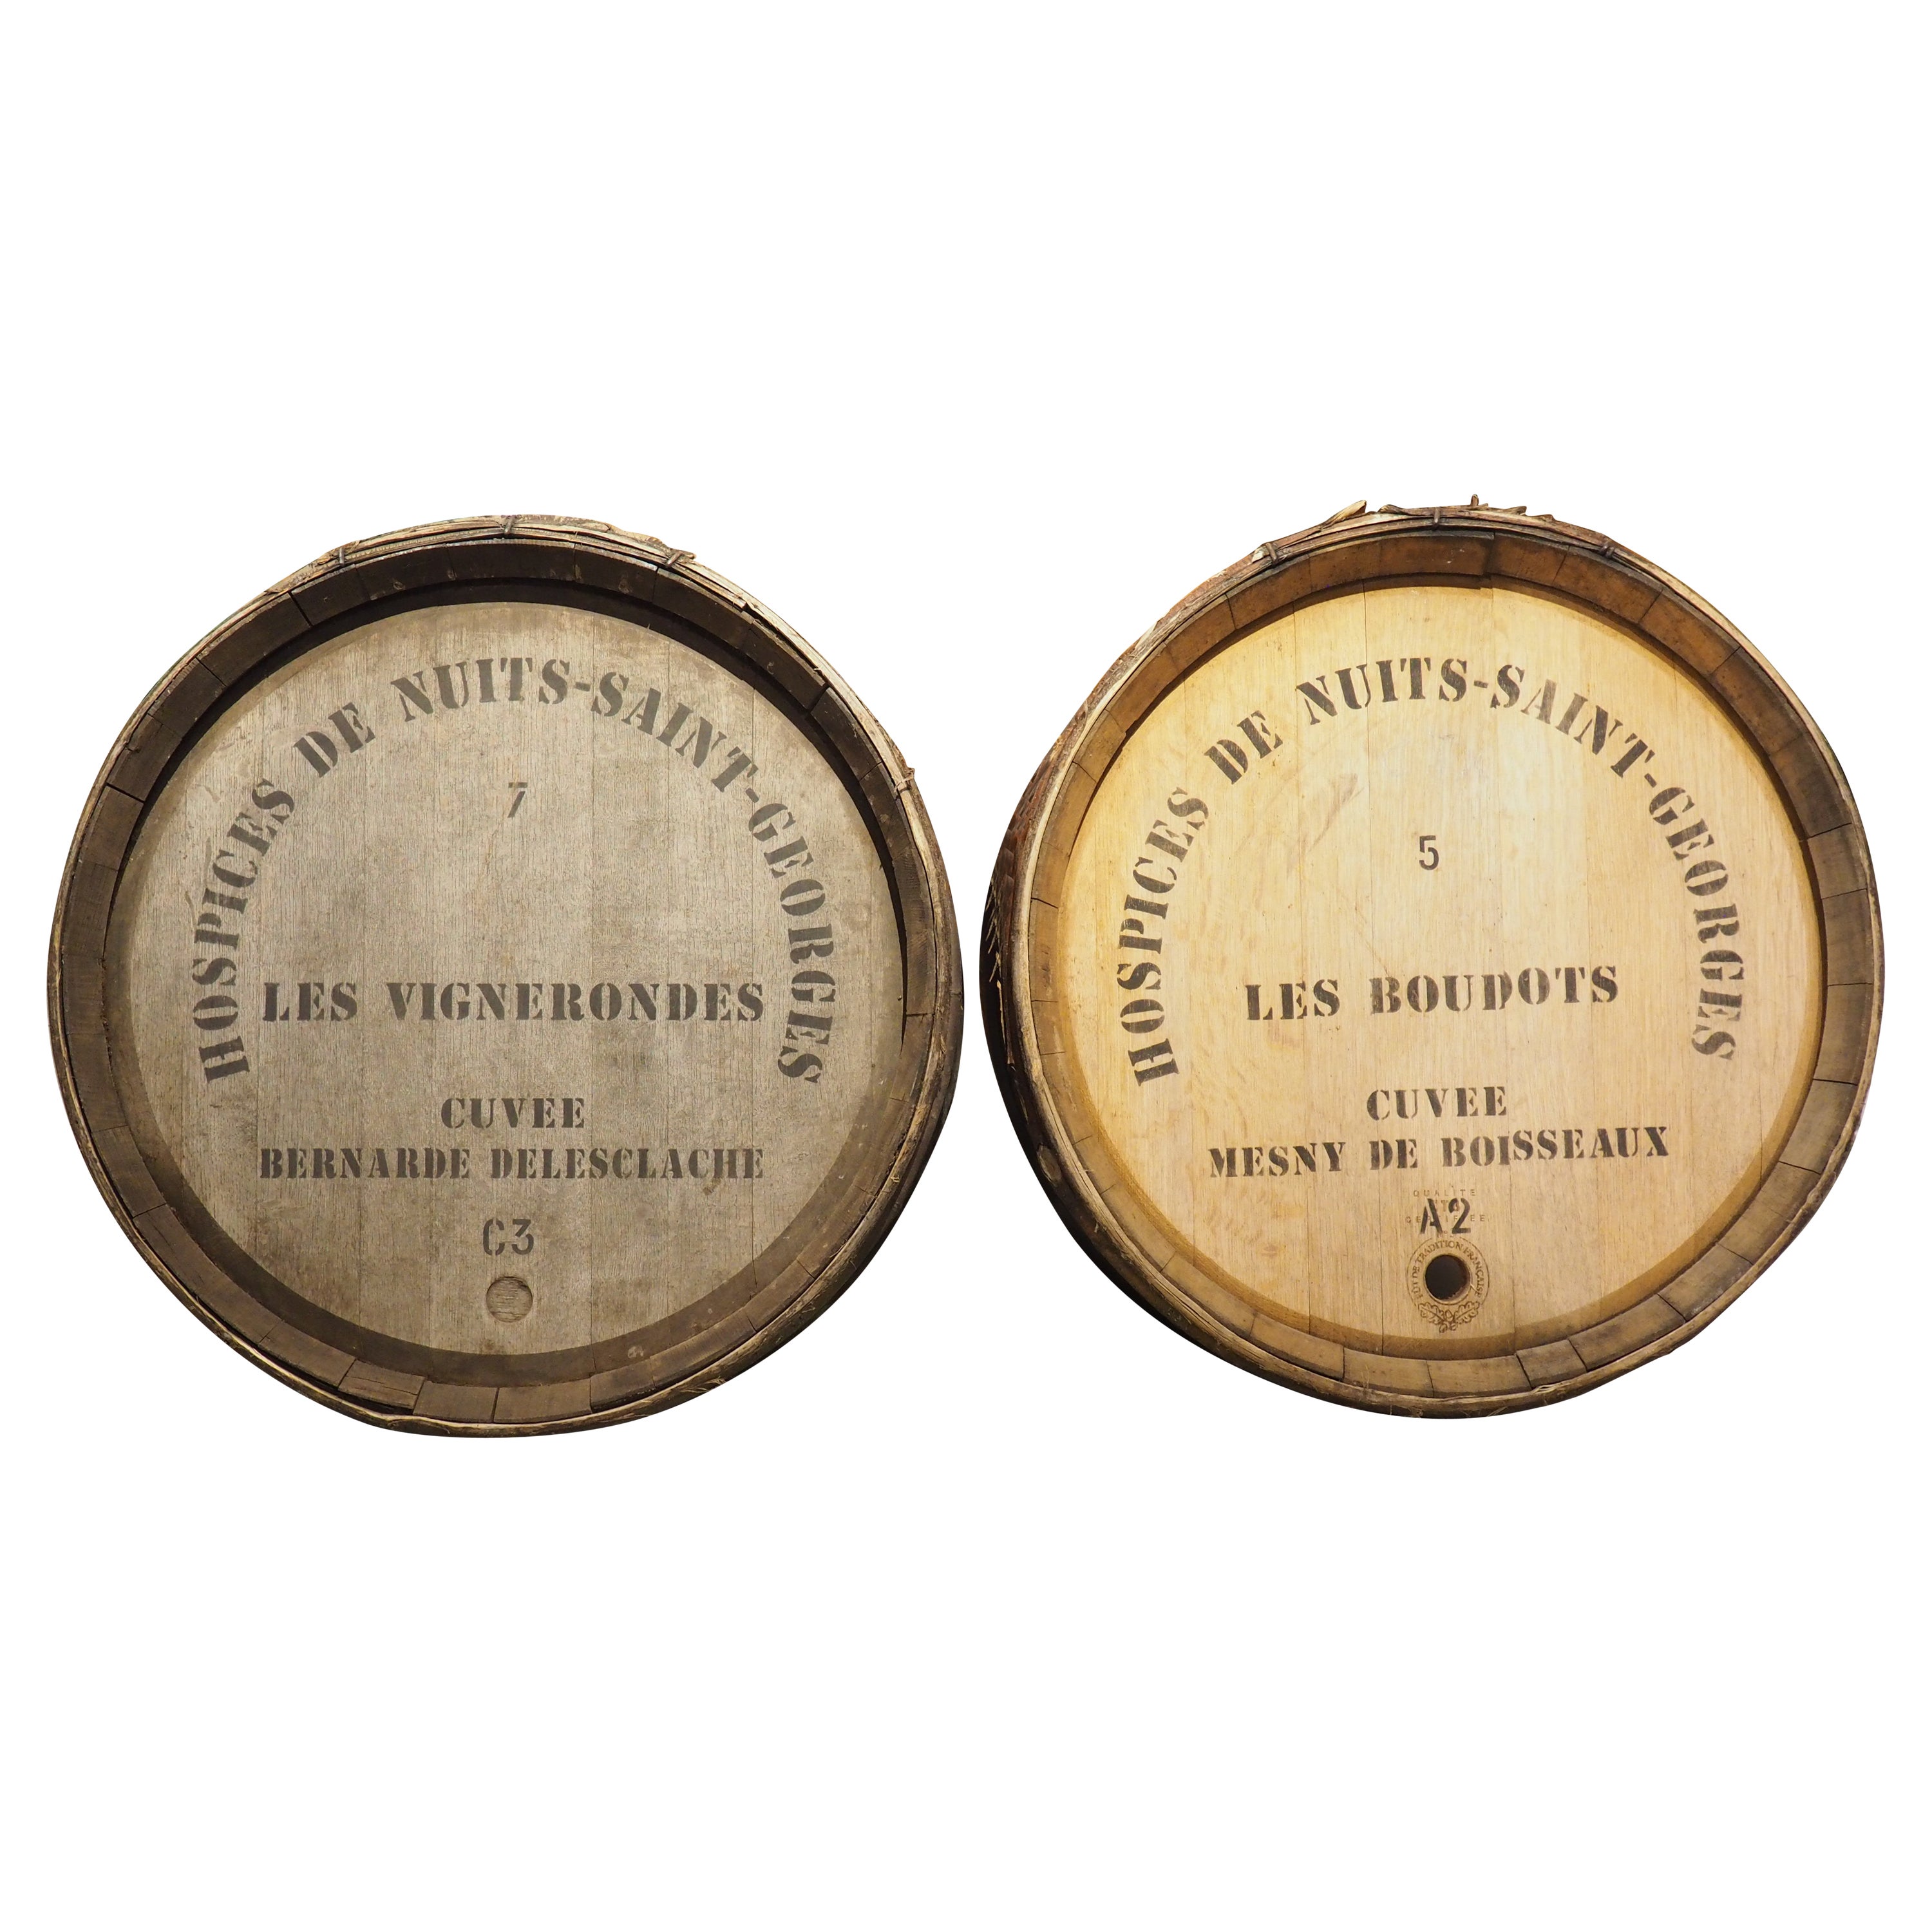 Pair of French Wine Barrel Facades, “Hospices de Nuits-Saint-Georges”, 1900s For Sale